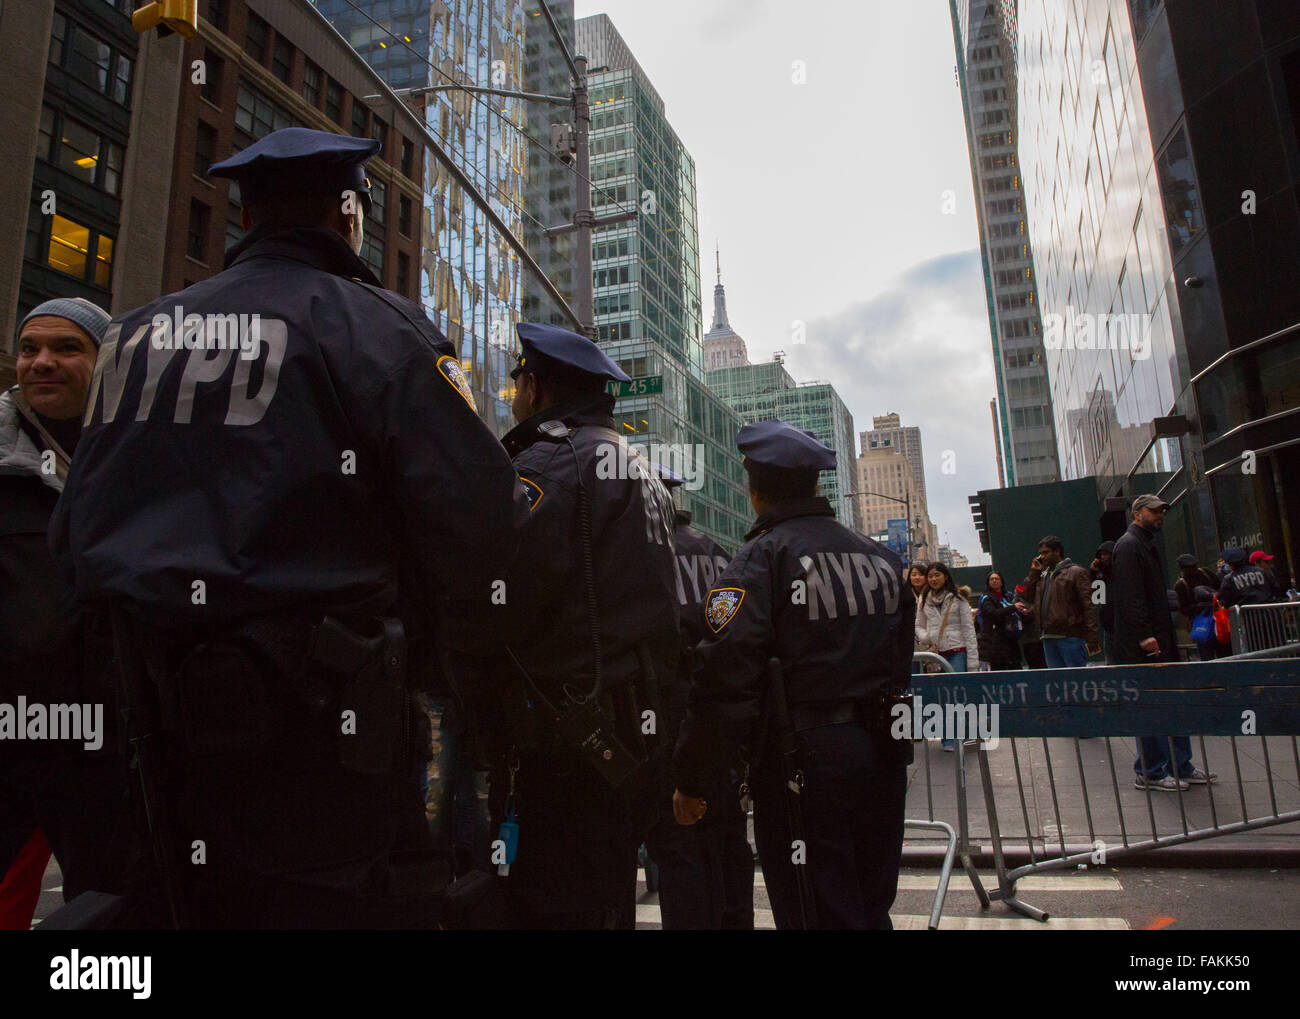 New York, NY, USA. 31st Dec, 2015. The NYPD deploy 6,000 officers in Times Square on New Years Eve, including more than 500 members of the NYPD's new anti terror force. This action is taken by the NYPD  in response to reported terror threats by ISIS on New York, Washington DC, and Los Angeles. NYPD Chief of Department James O'Neil stressed ' People should feel safe this New Year's Eve because we're there. ' Credit:  Scott Houston/Alamy Live News Stock Photo